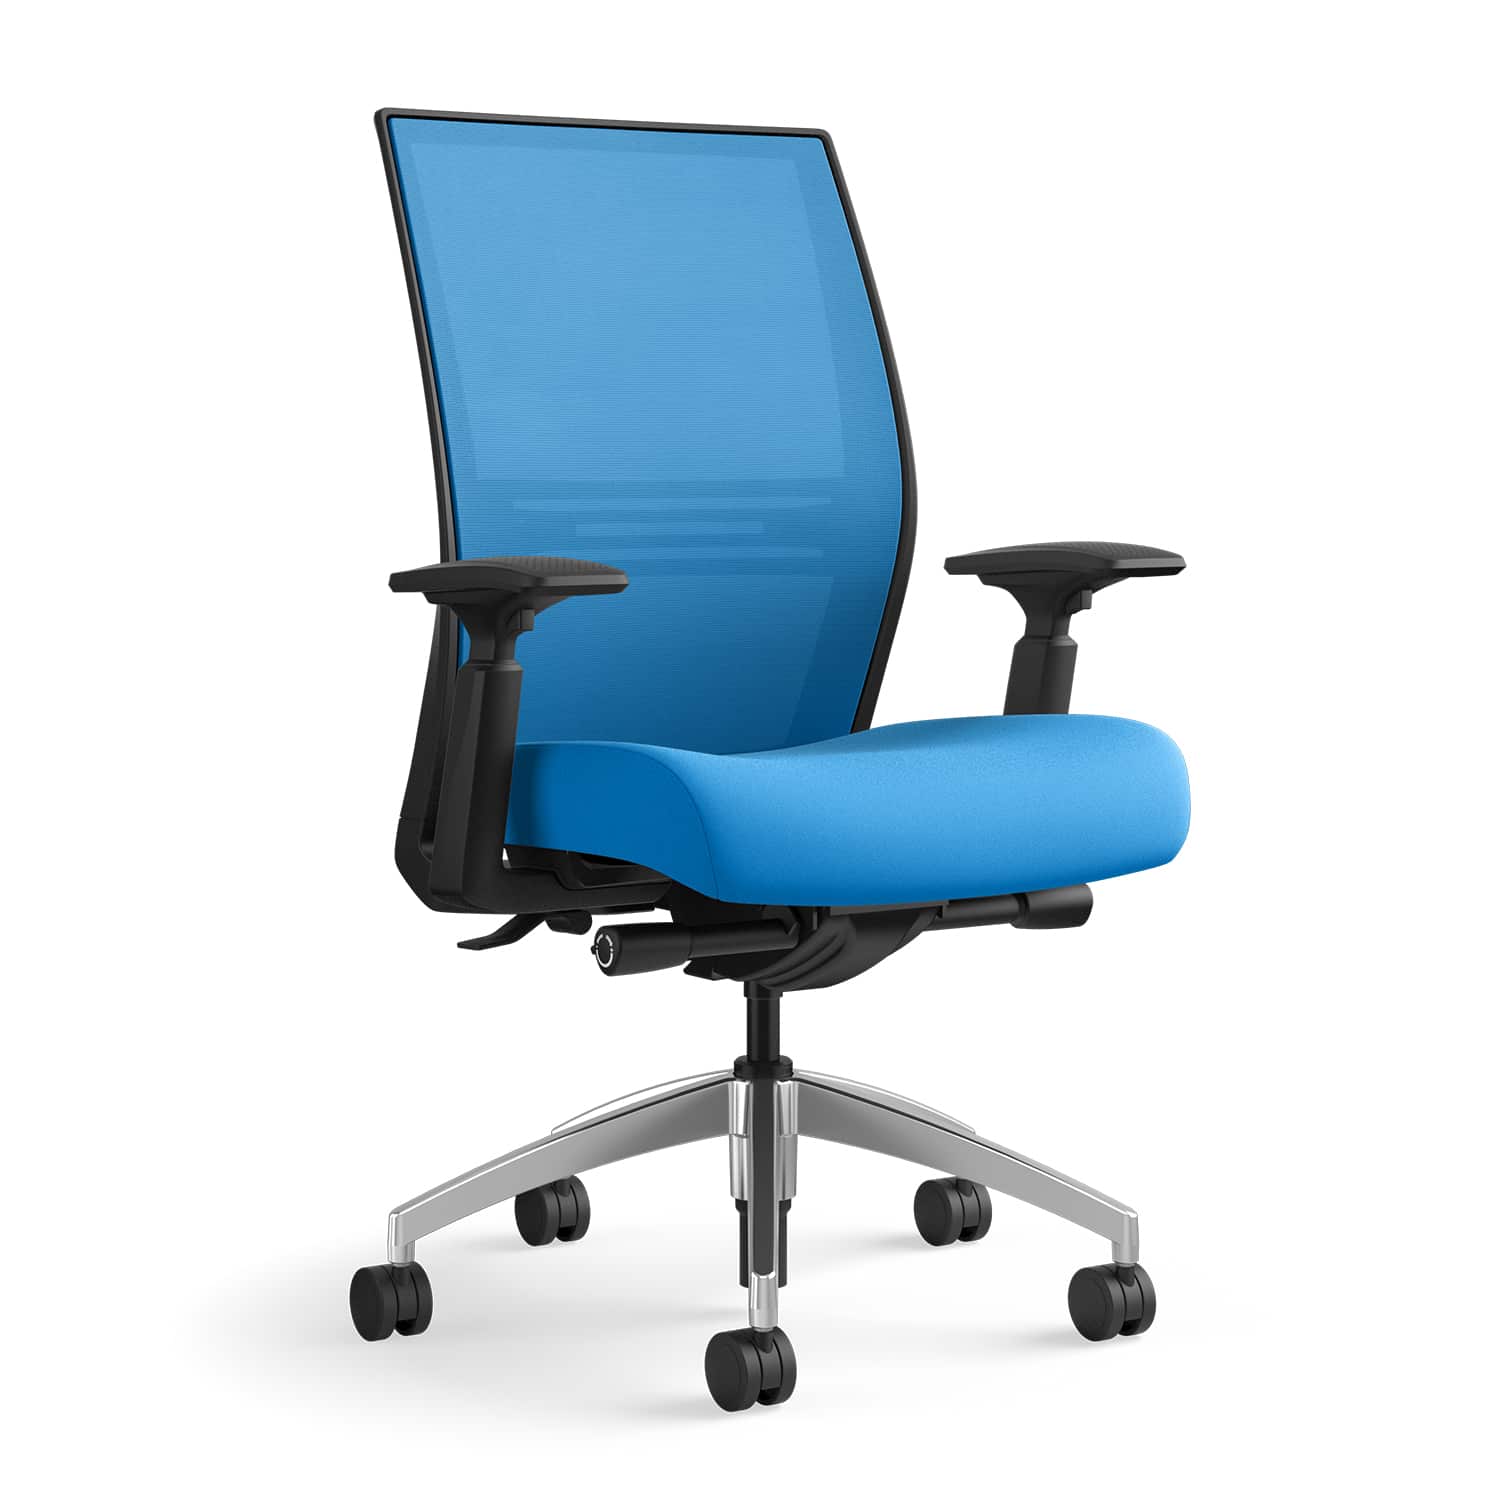 Finding the Best Ergonomic Office Chair Systems Furniture